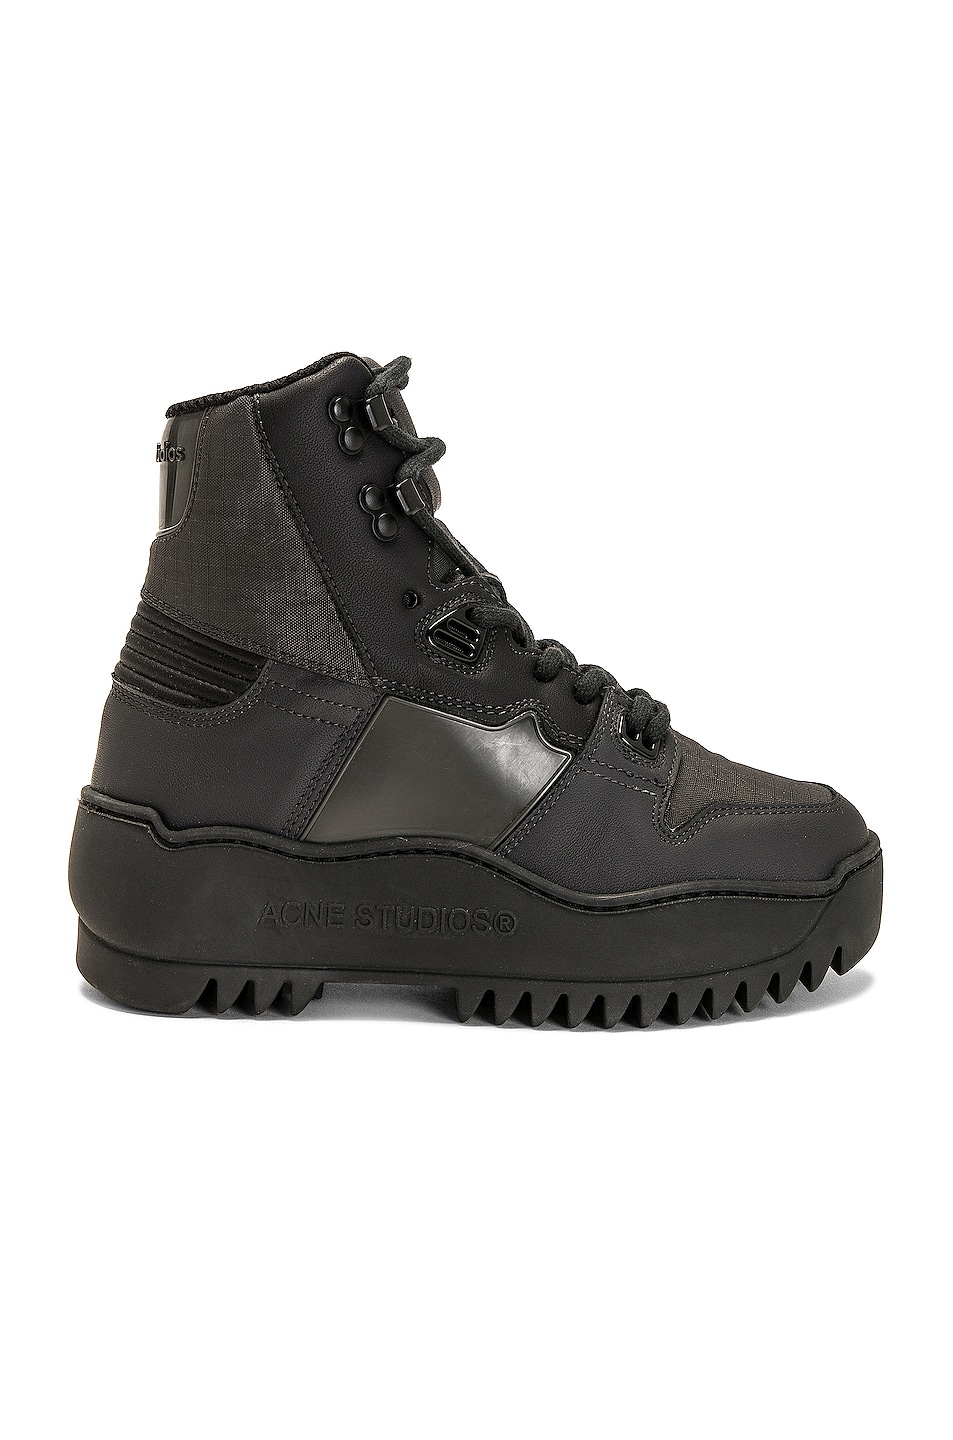 Image 1 of Acne Studios High Top Sneaker in Multi Anthracite